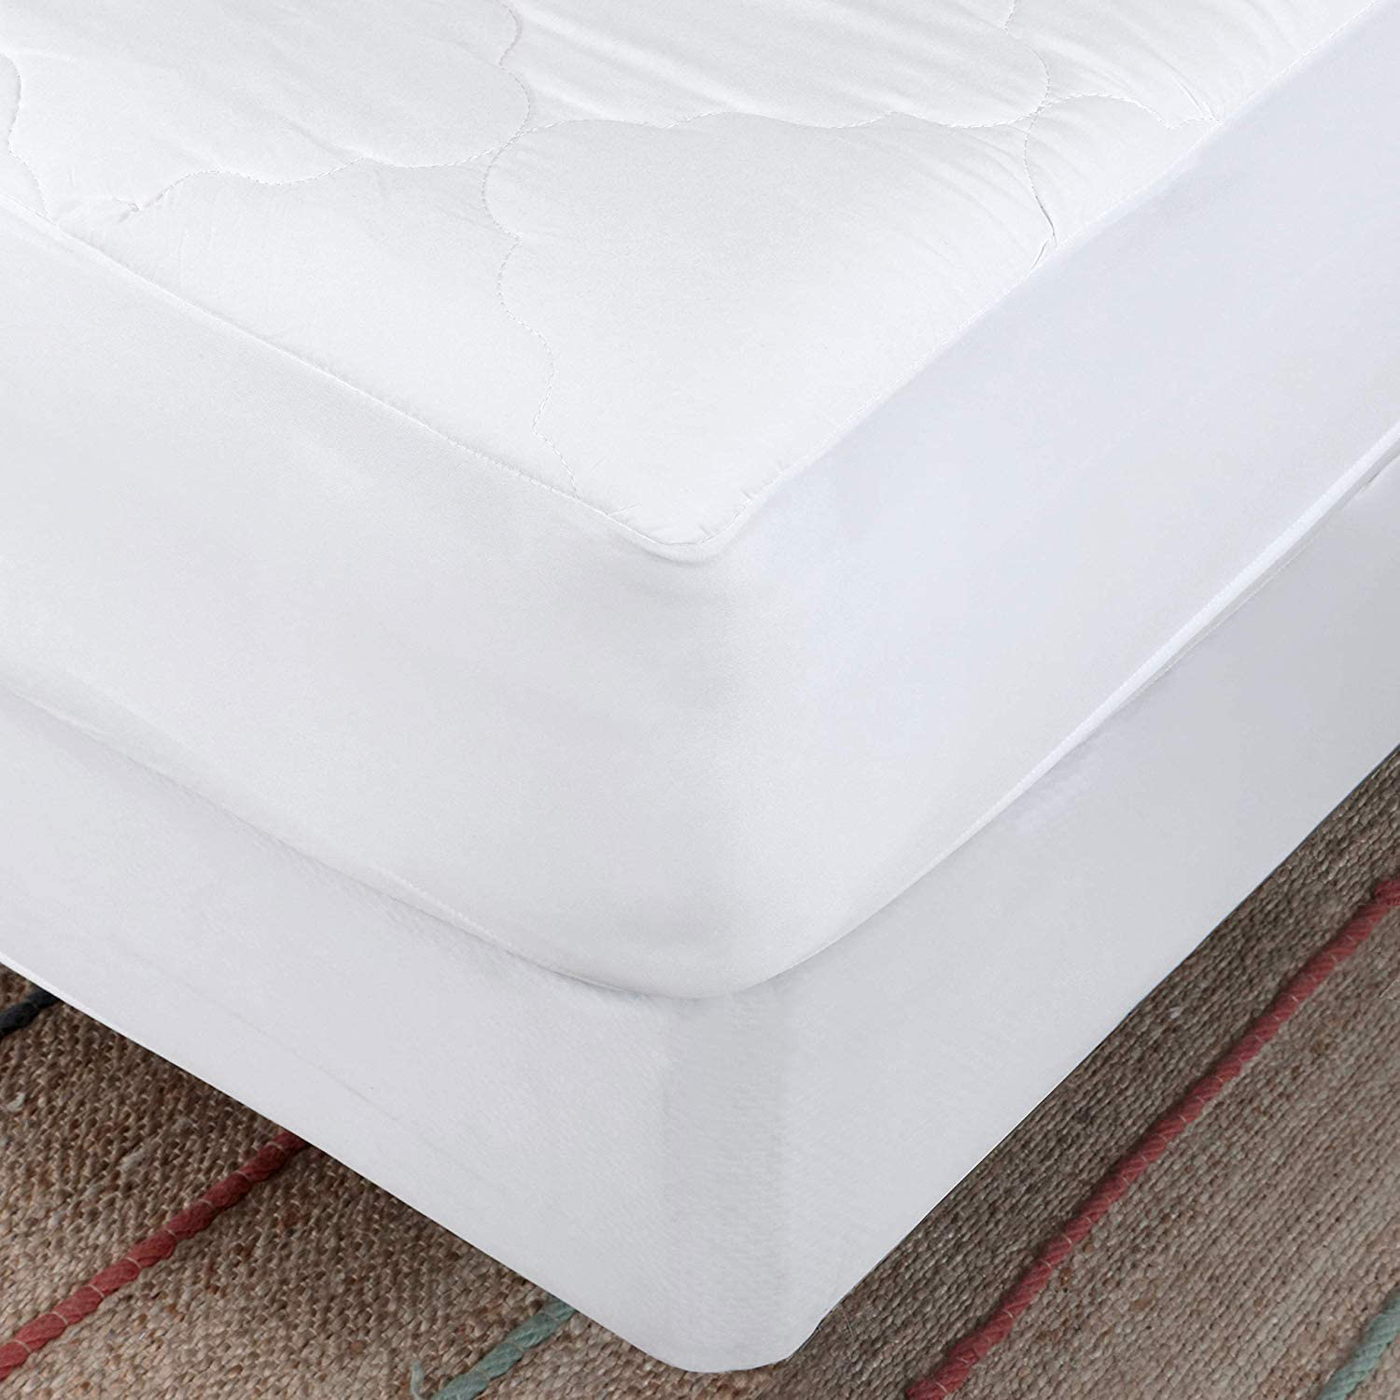 Micropuff Twin Mattress Pad Cover Fitted, Down Alternative Fiber Fill, Quilted Bed Protector - Ideal for Daybed Mattresses (Twin Size 39x75) Deep Pocket Stretches up to 15"